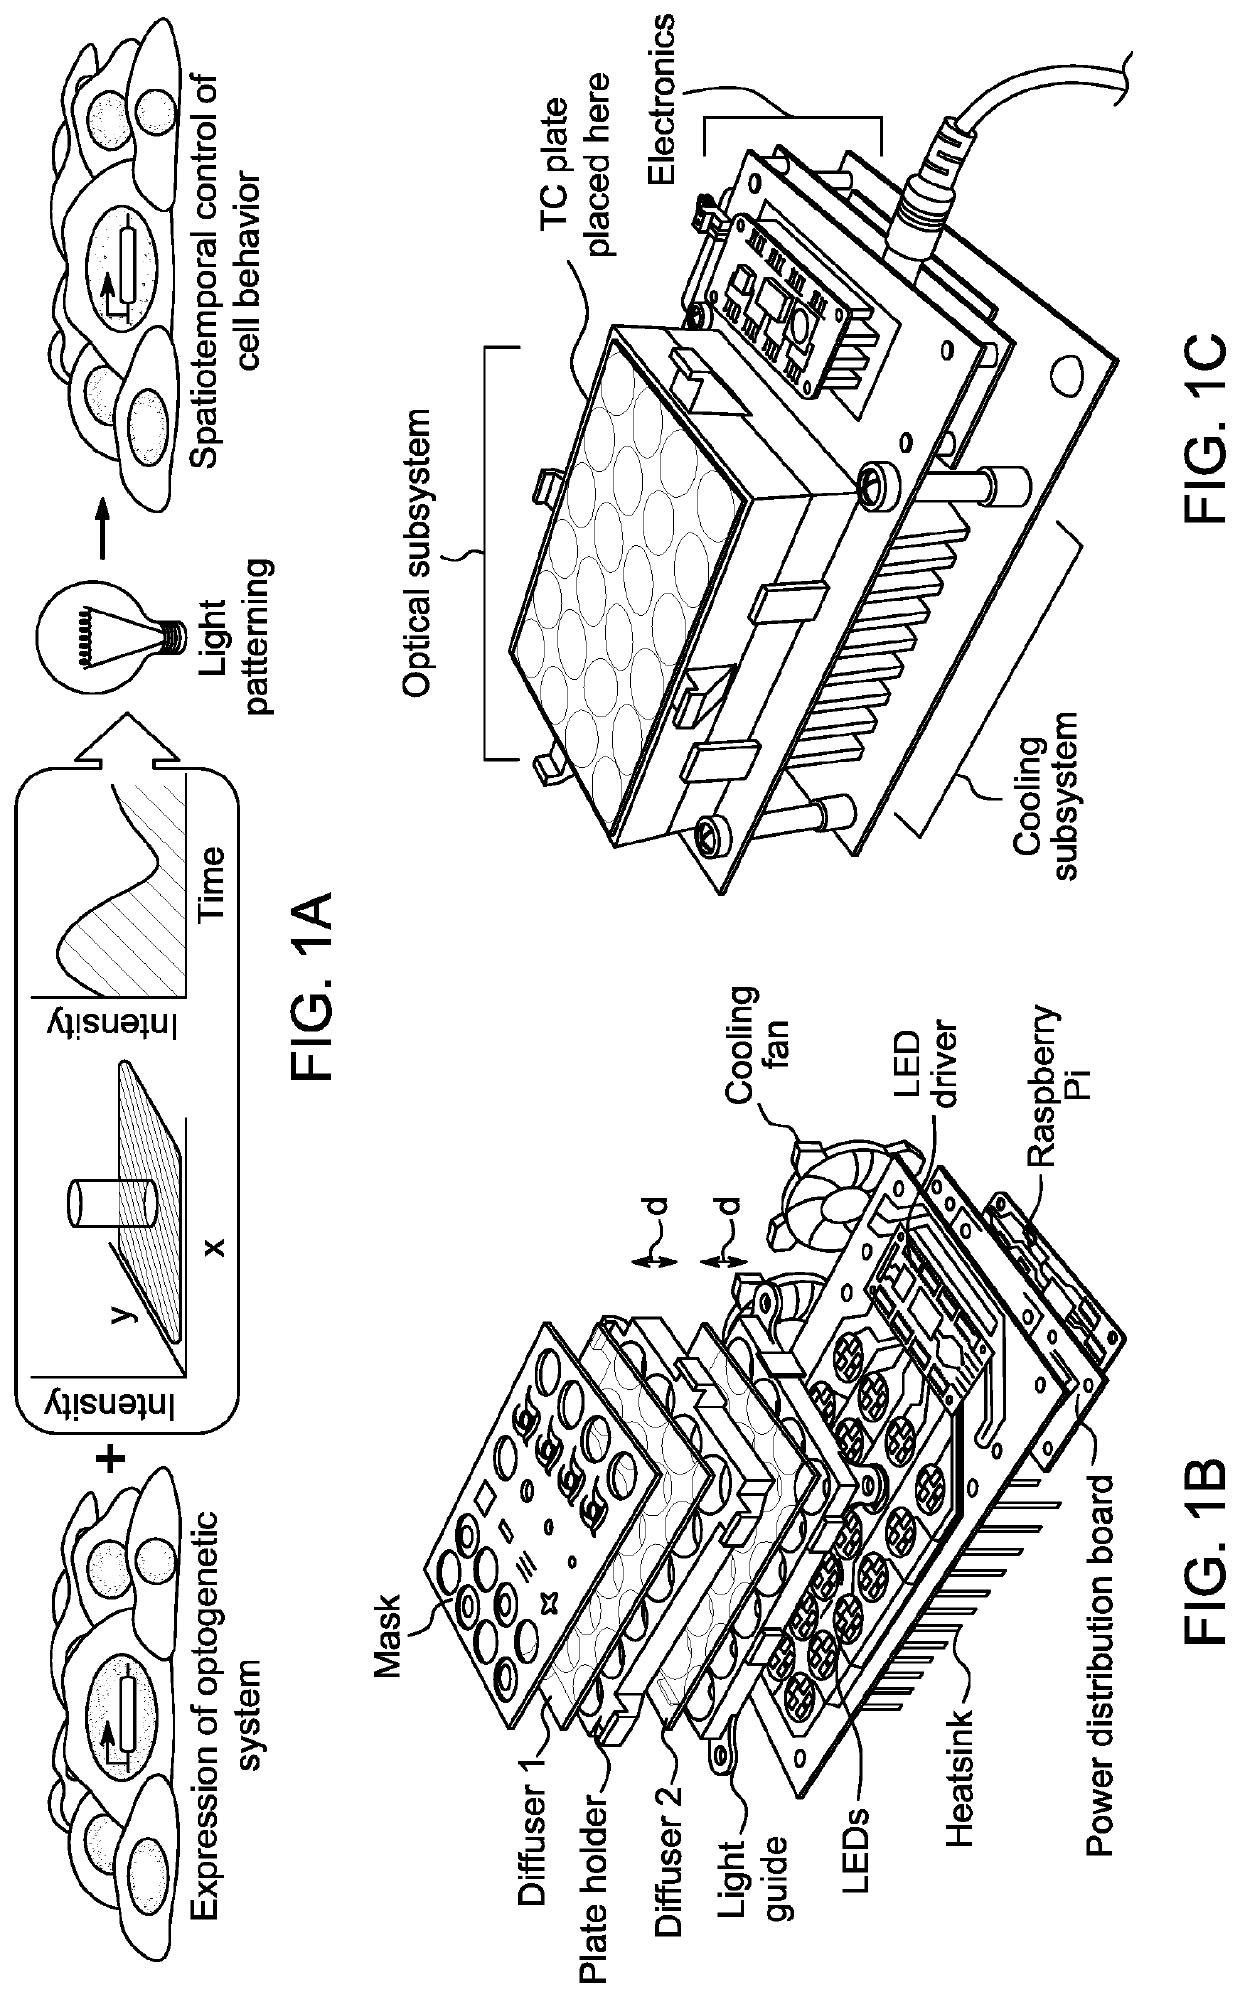 Illumination device for spatial and temporal control of morphogen signaling in cell cultures